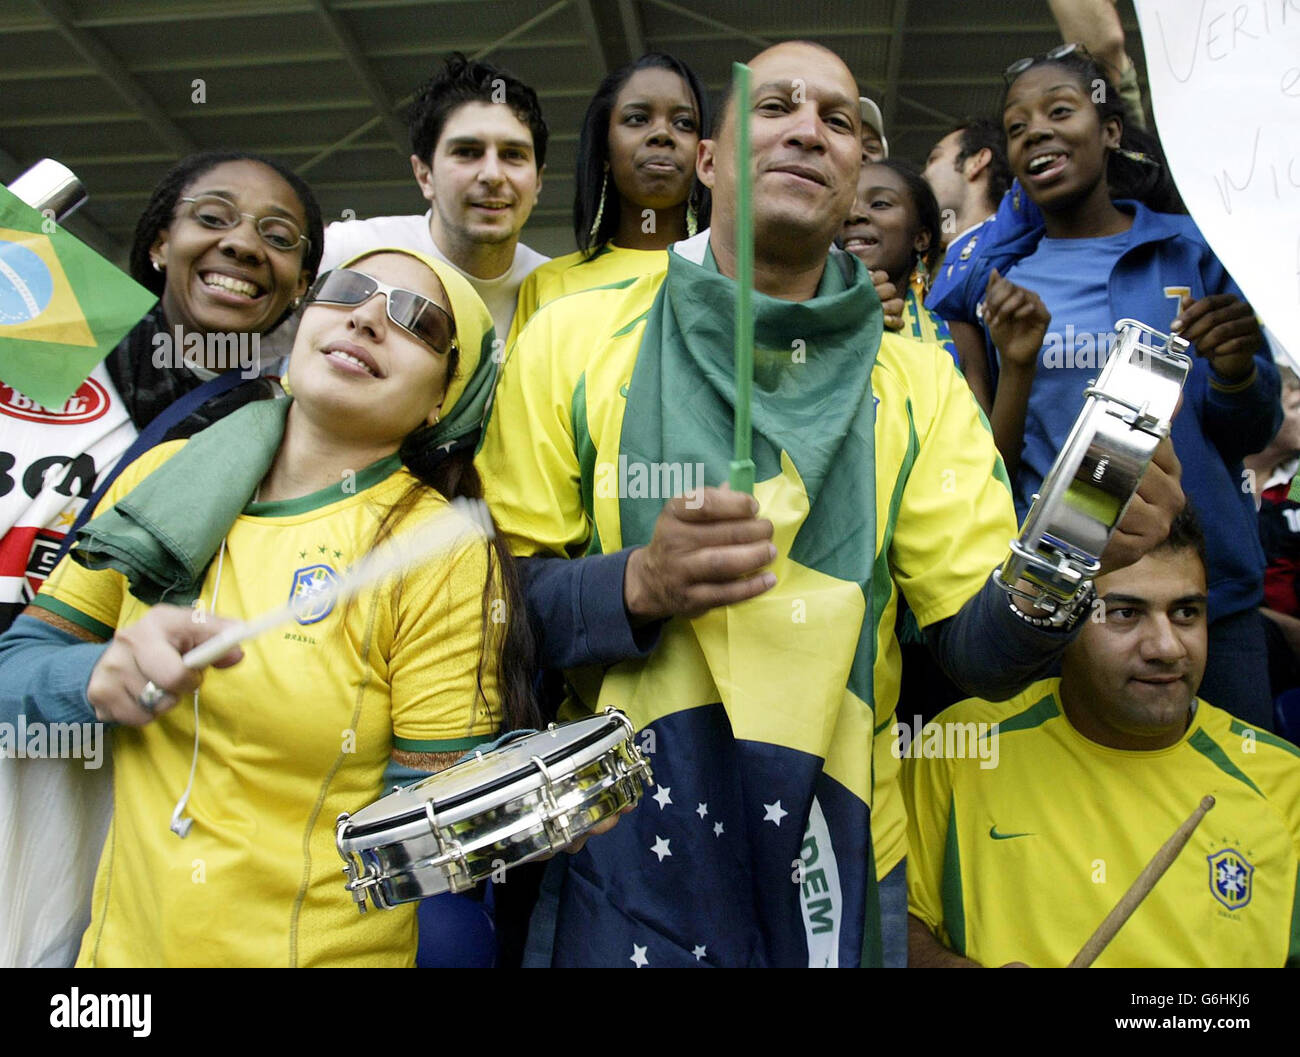 ** Brazilian fans enjoy themselves, during the friendly international match against Jamaica at Walkers Stadium, Leicester. Brazil won 1-0. Stock Photo